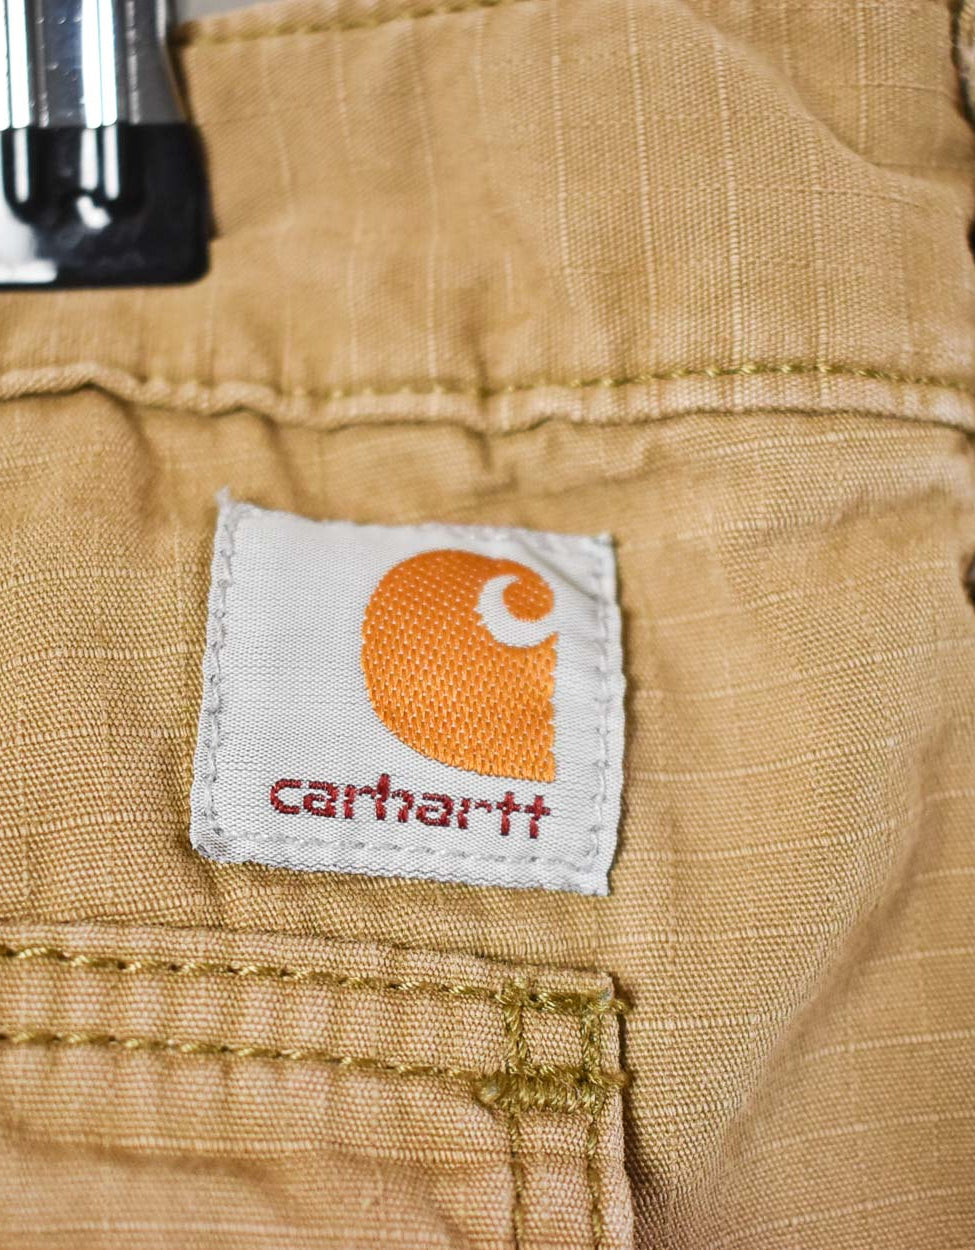 Neutral Carhartt Relaxed Fit Cargo Trousers - W36 L33